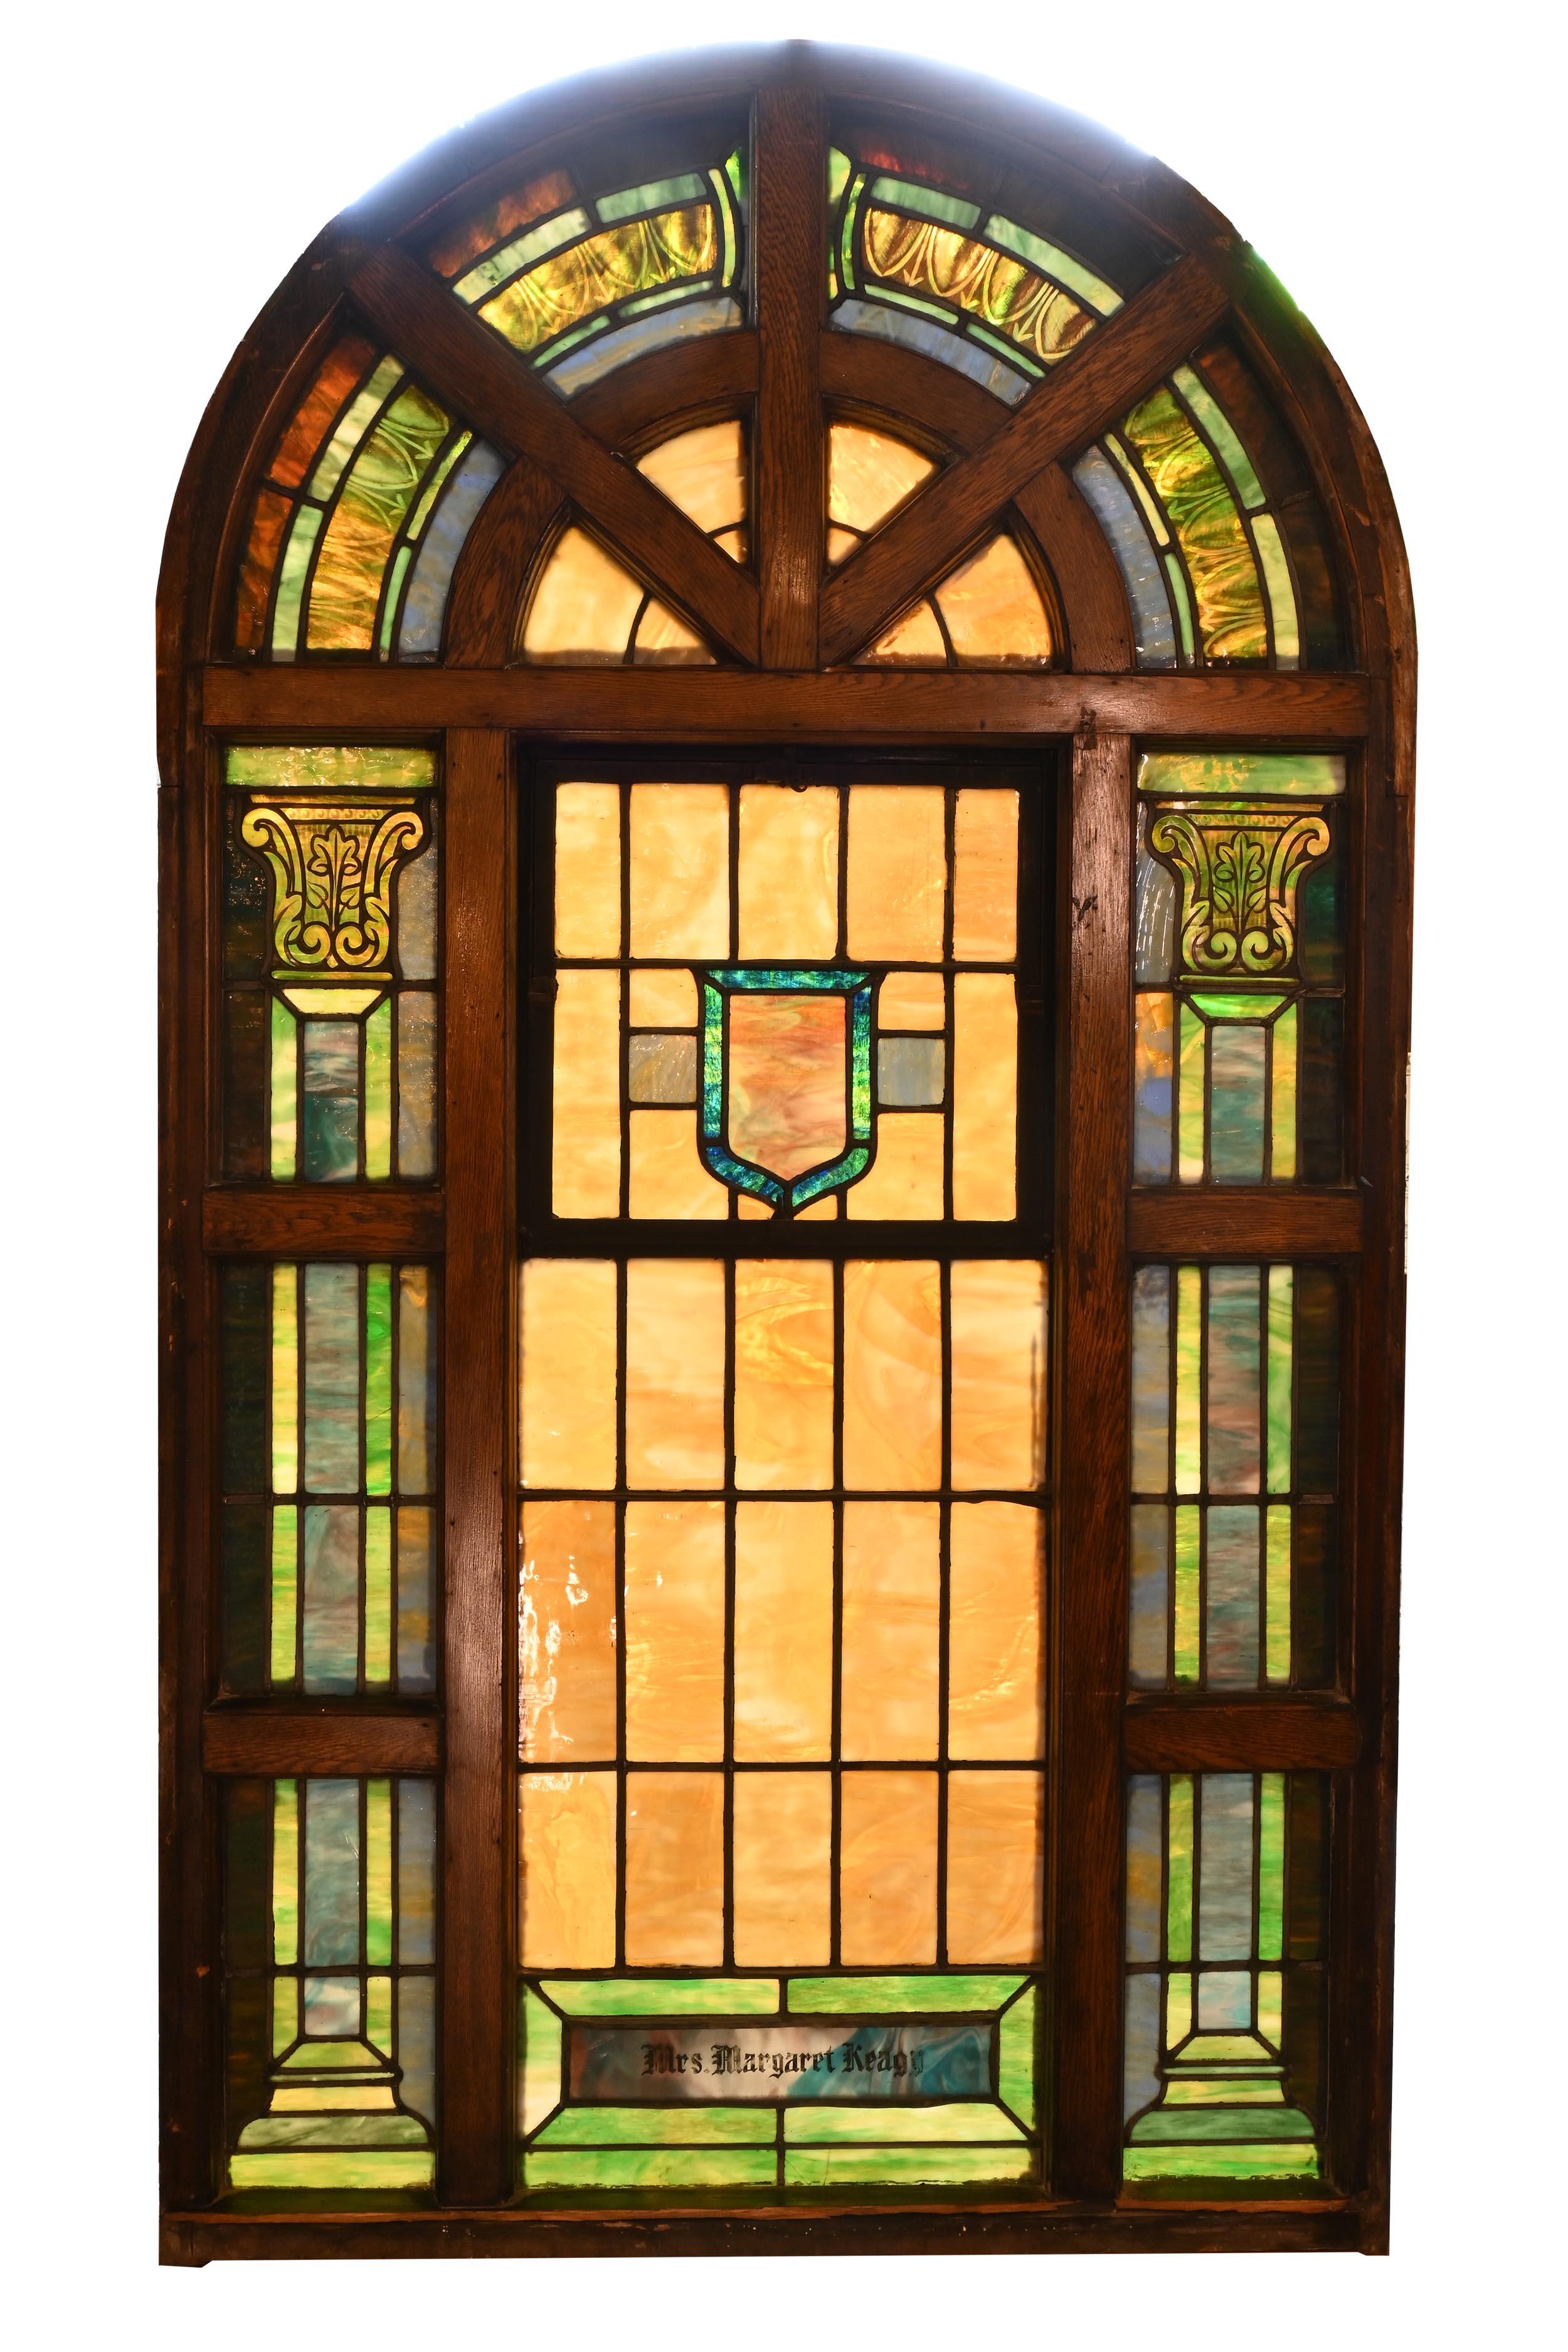 Amazing arch topped windows in great condition. Each window has a 24” tall arch top with egg & dart tops on the eight divided sections over a 22” by 55” center panel. Flanking columns in three sections finishing these large scale windows. Colors